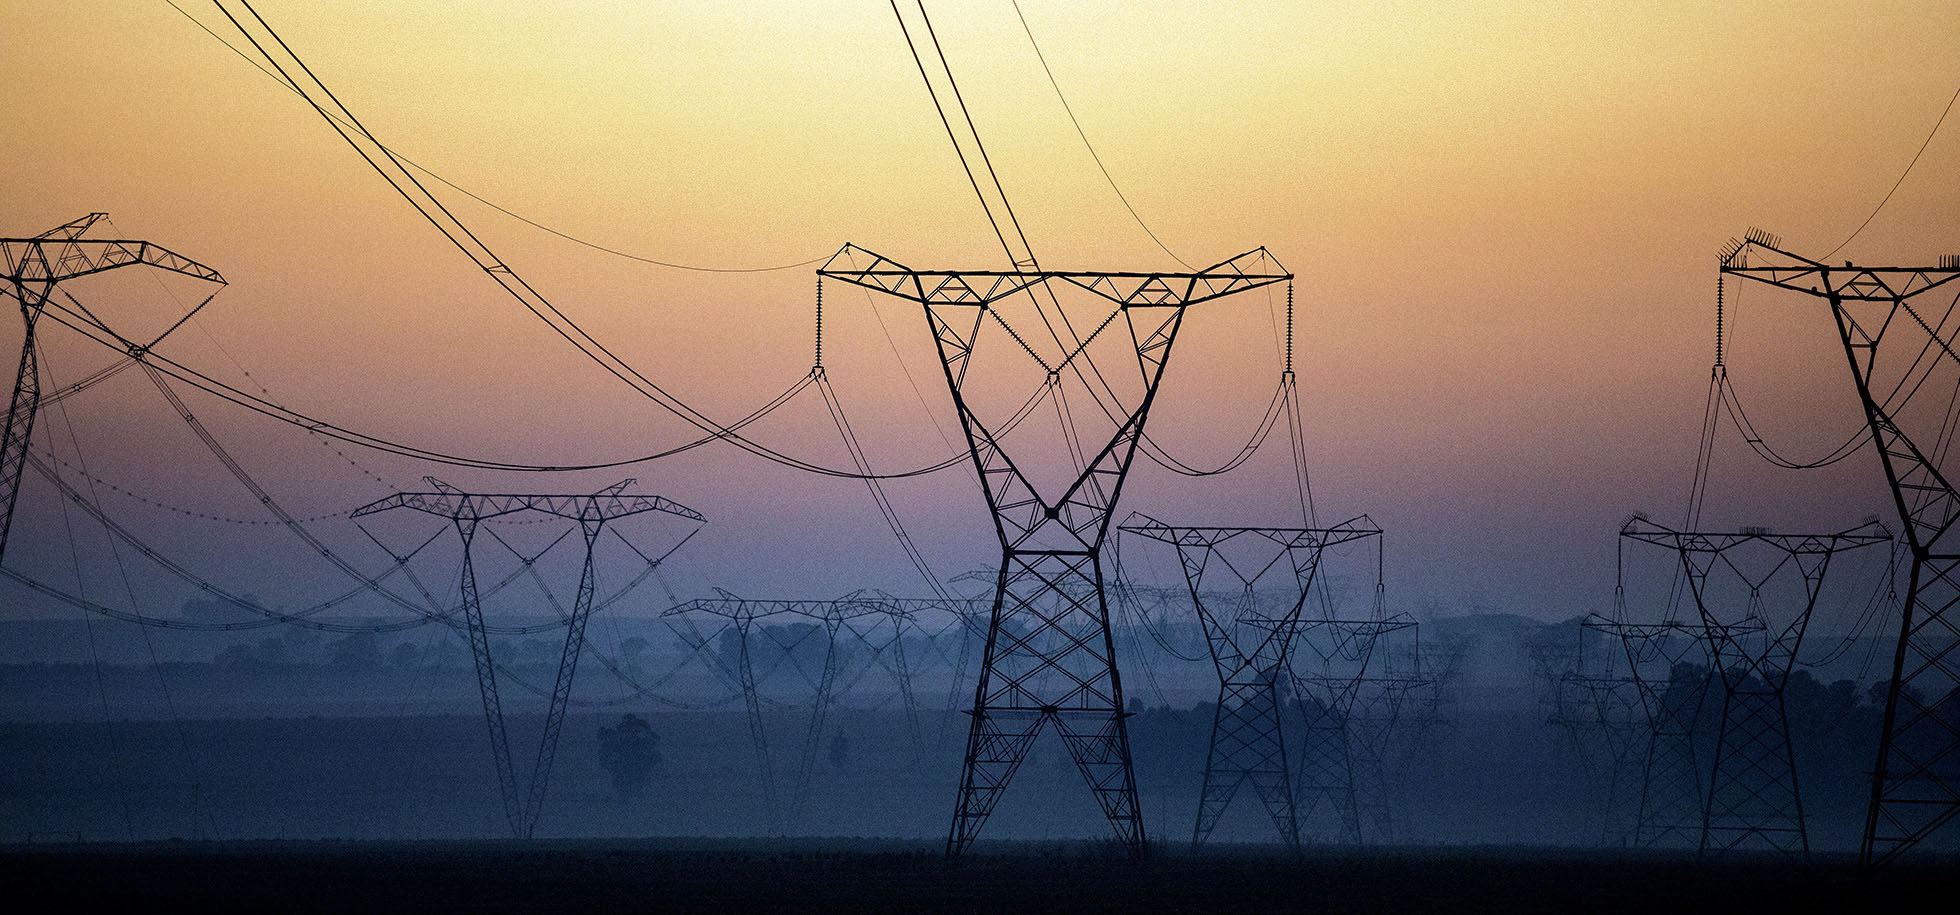 ‘drastic measures’ needed to avoid power network collapse in joburg, says city power chairman